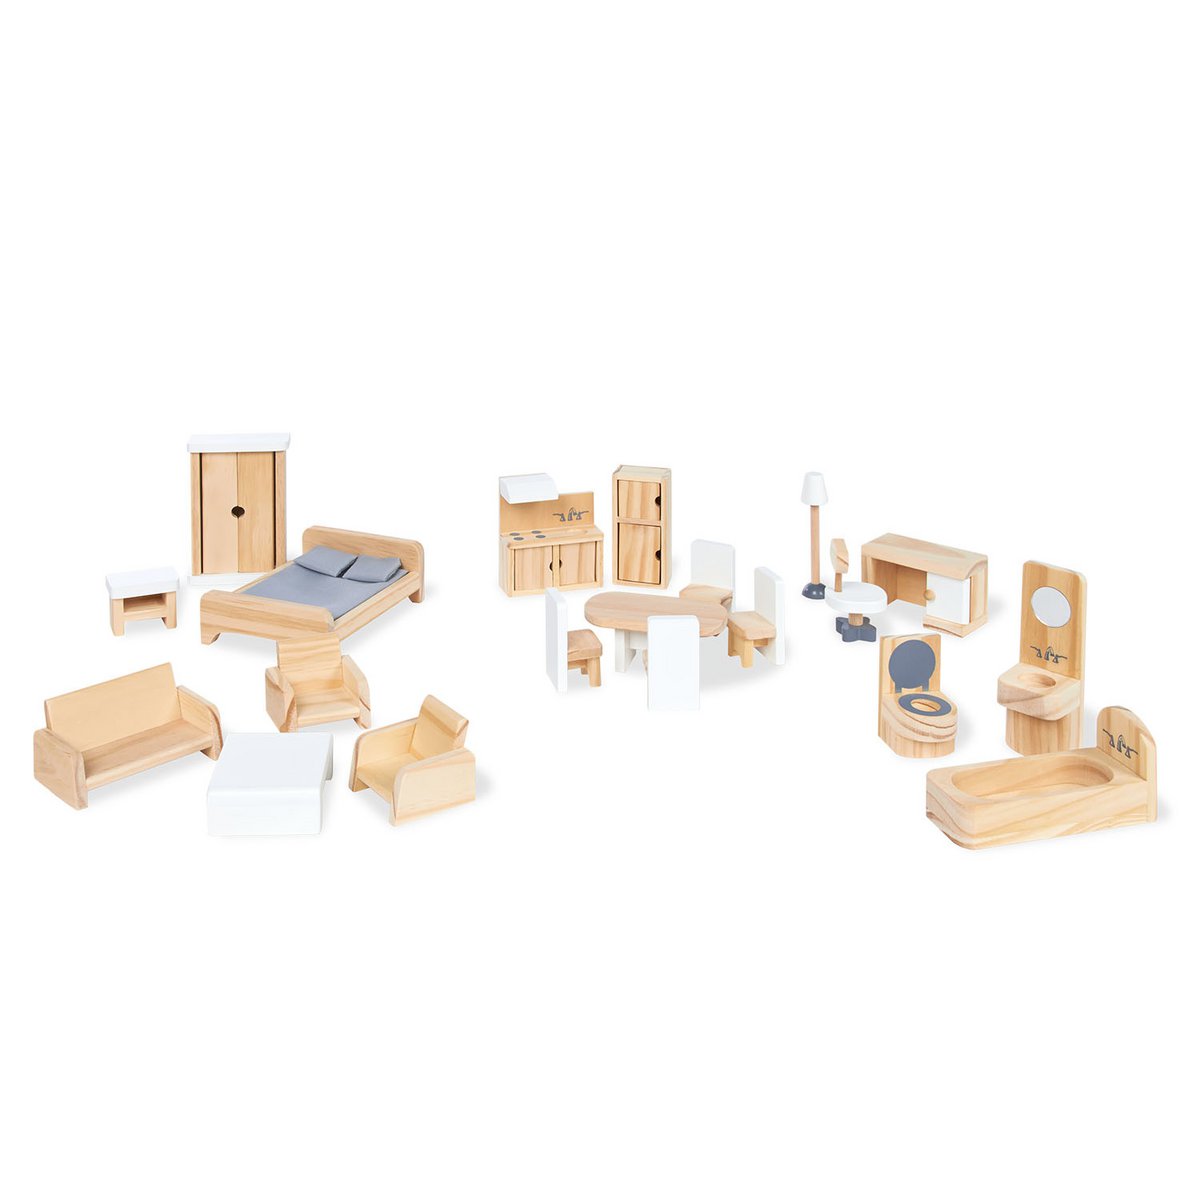 Doll’s house furniture, 20 parts